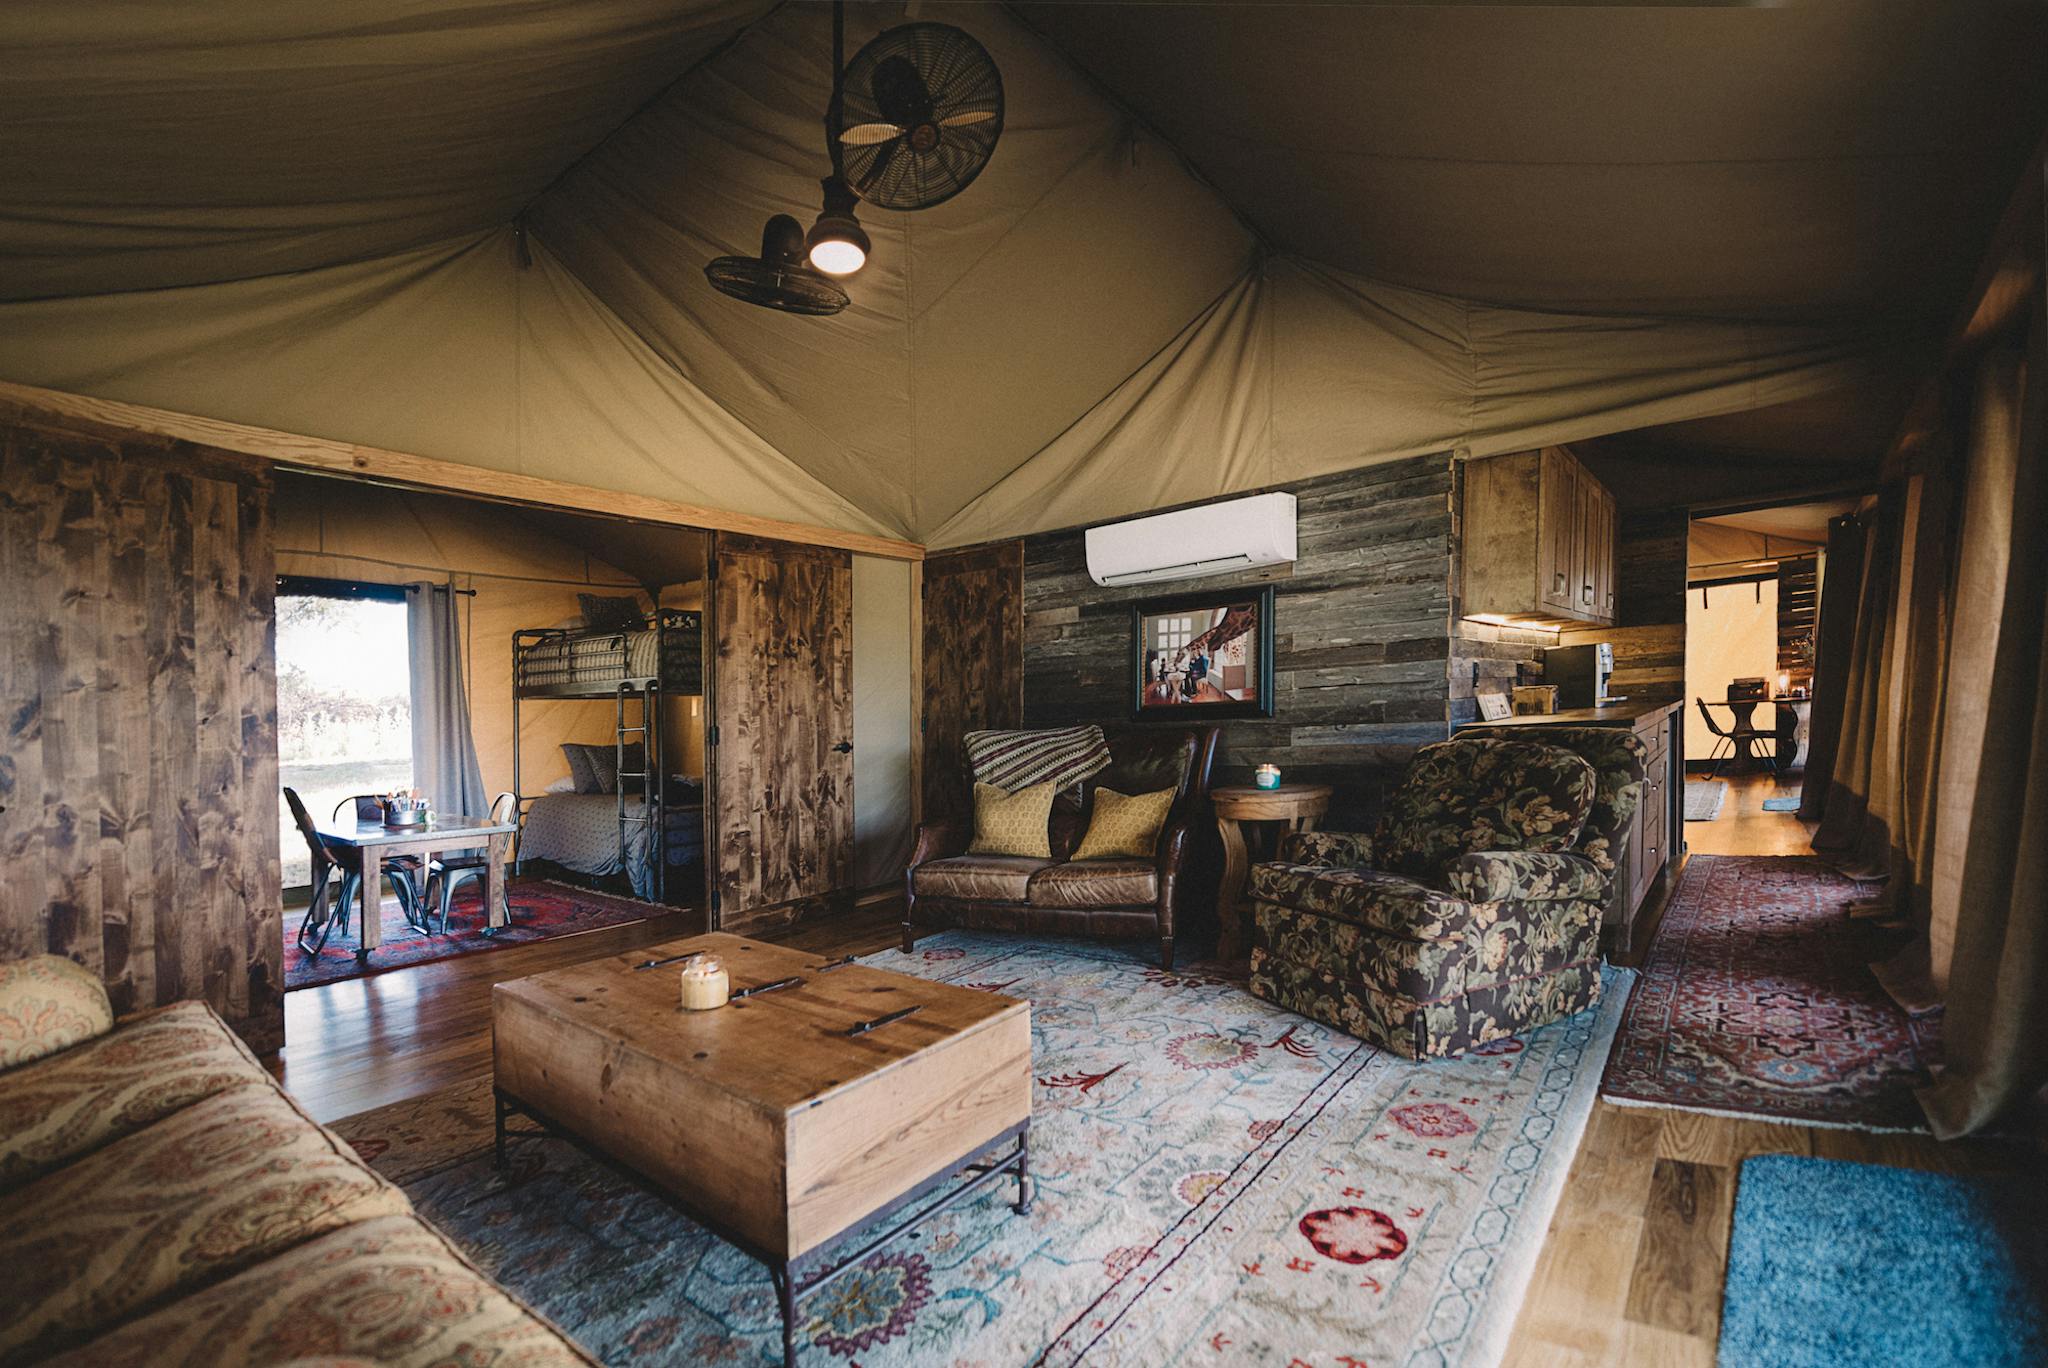 Living room of the family tent.